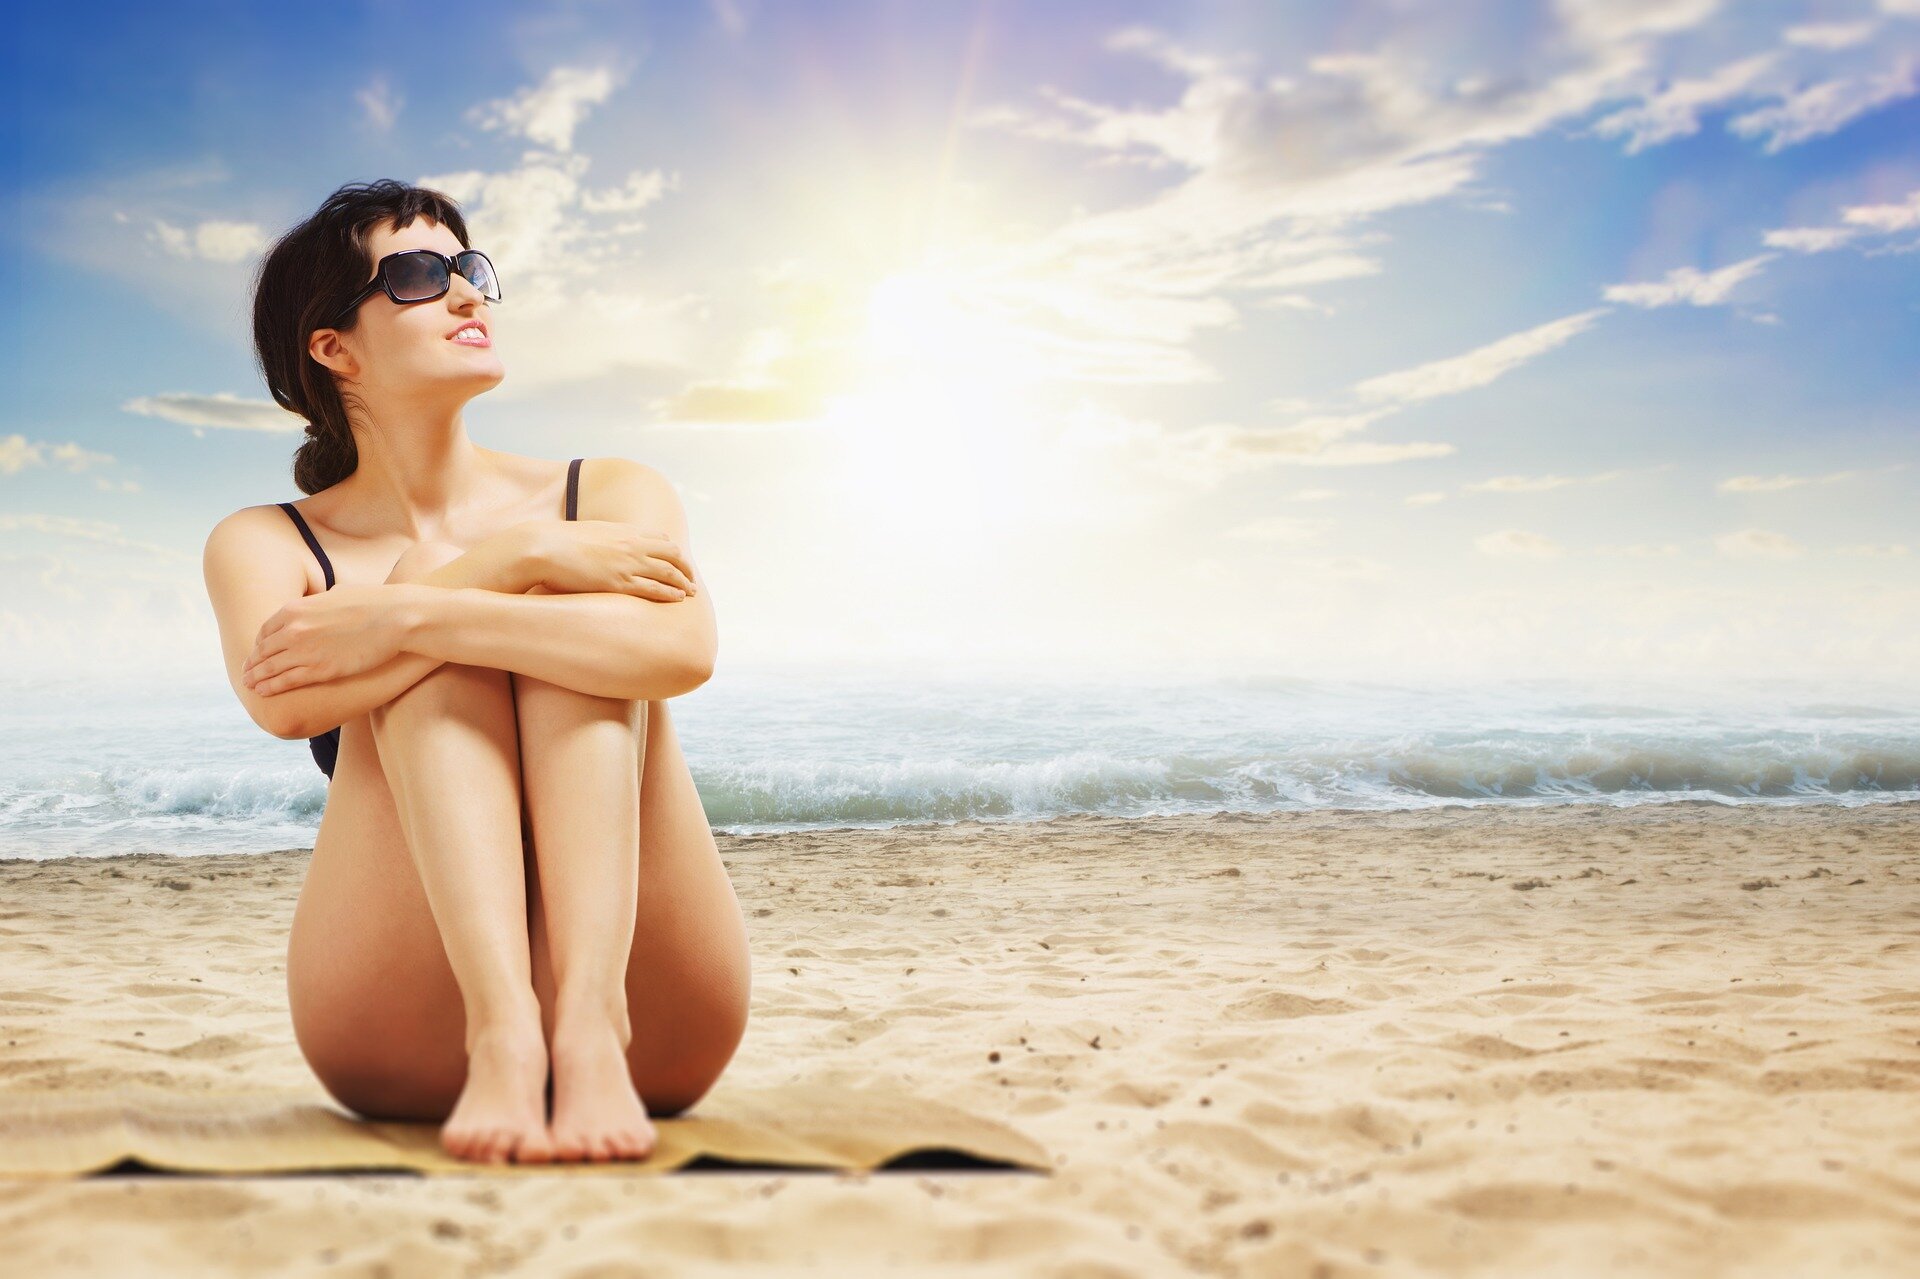 Bare Beach Body - What's your attitude about body hair removal?